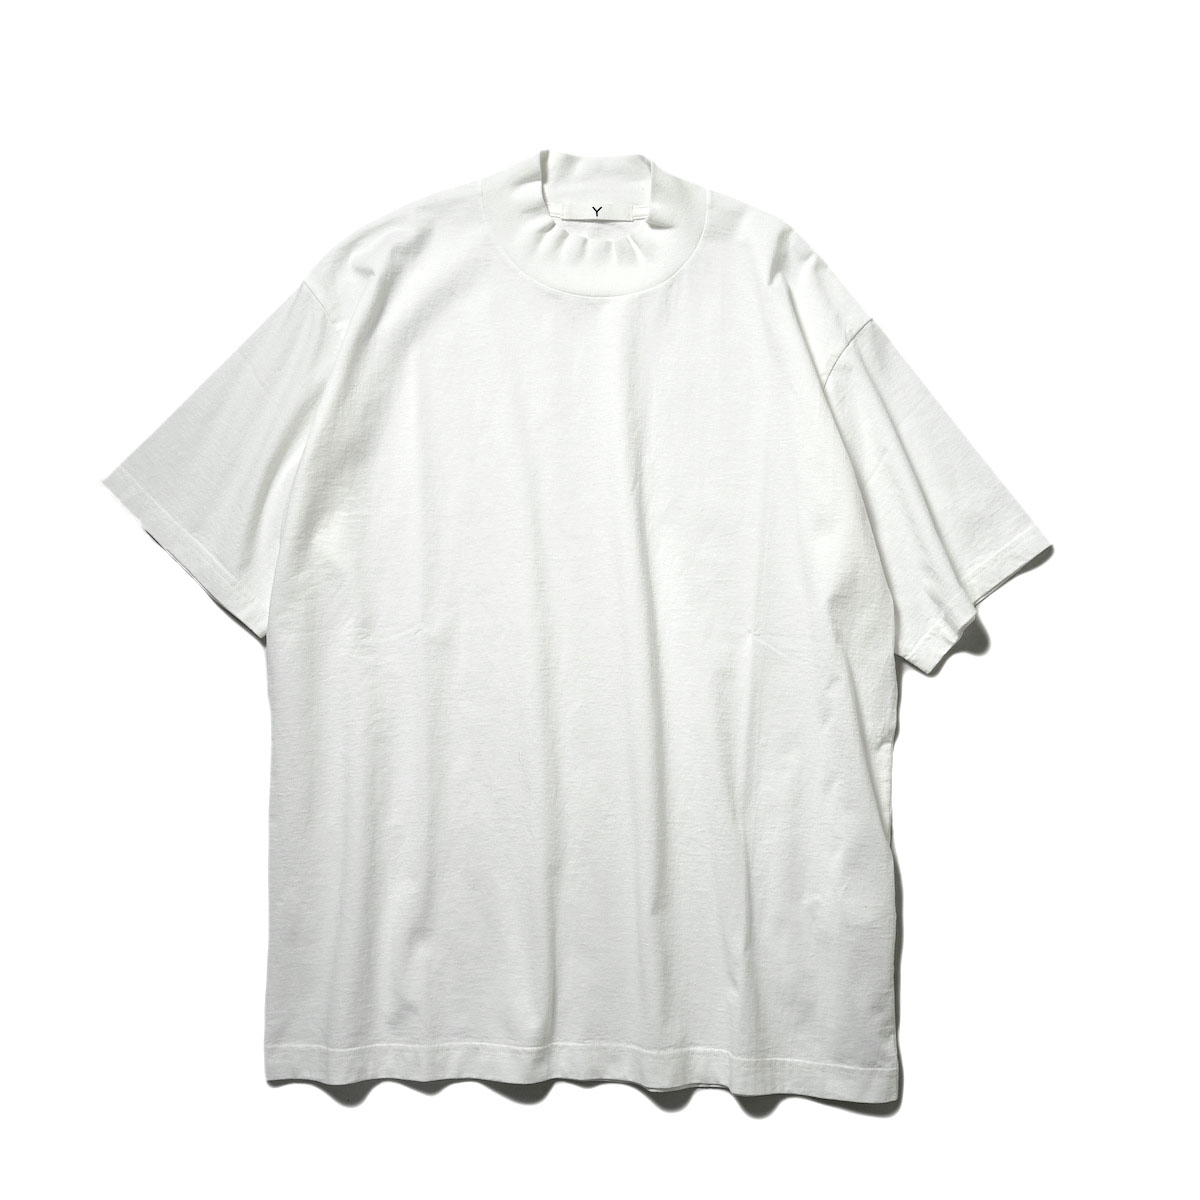 Y / ORGANIC COTTOM JERSEY MOCK NECK S/S T (White)